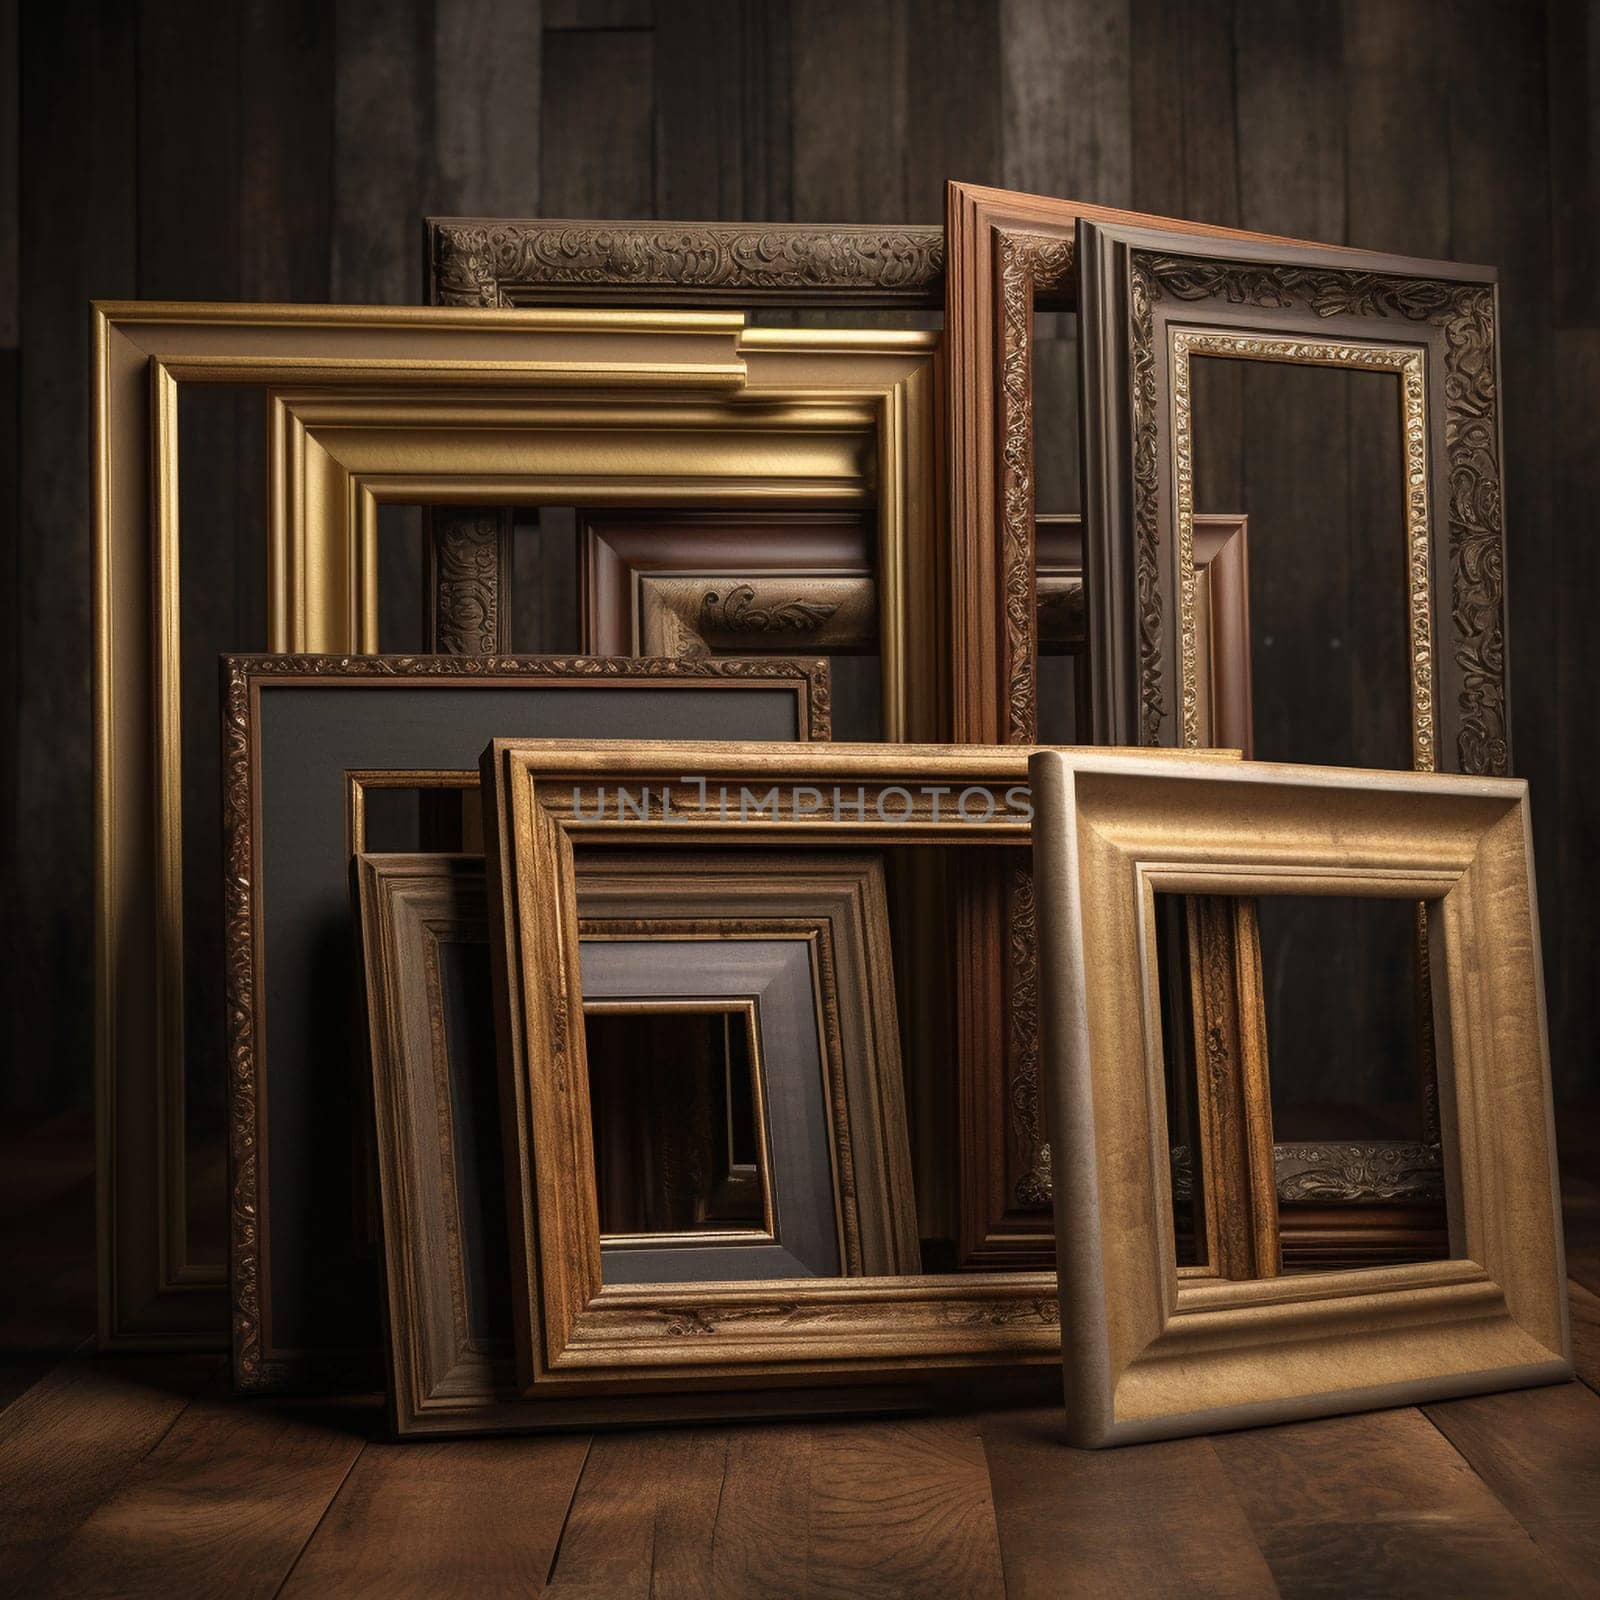 The Beauty and Elegance of Wooden Picture Frames by Sahin